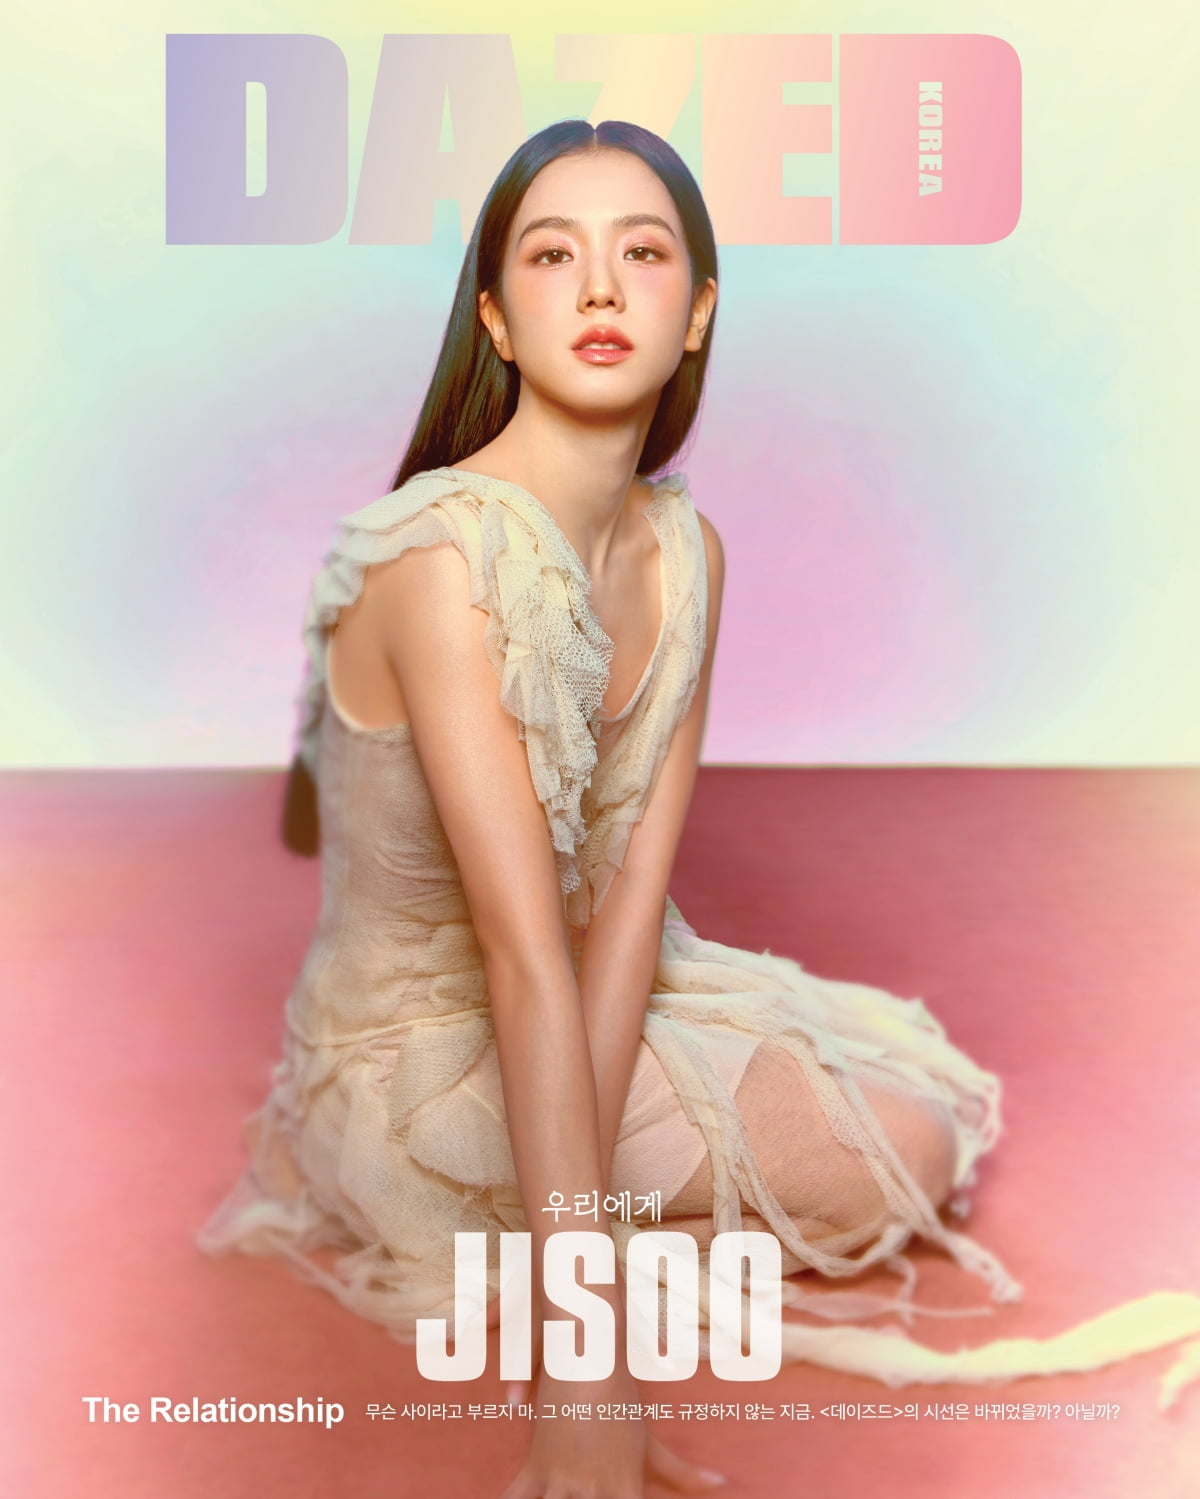 Blackpink Jisoo “Motto = Just like that, I’m not happy when I’m tied down to something” 